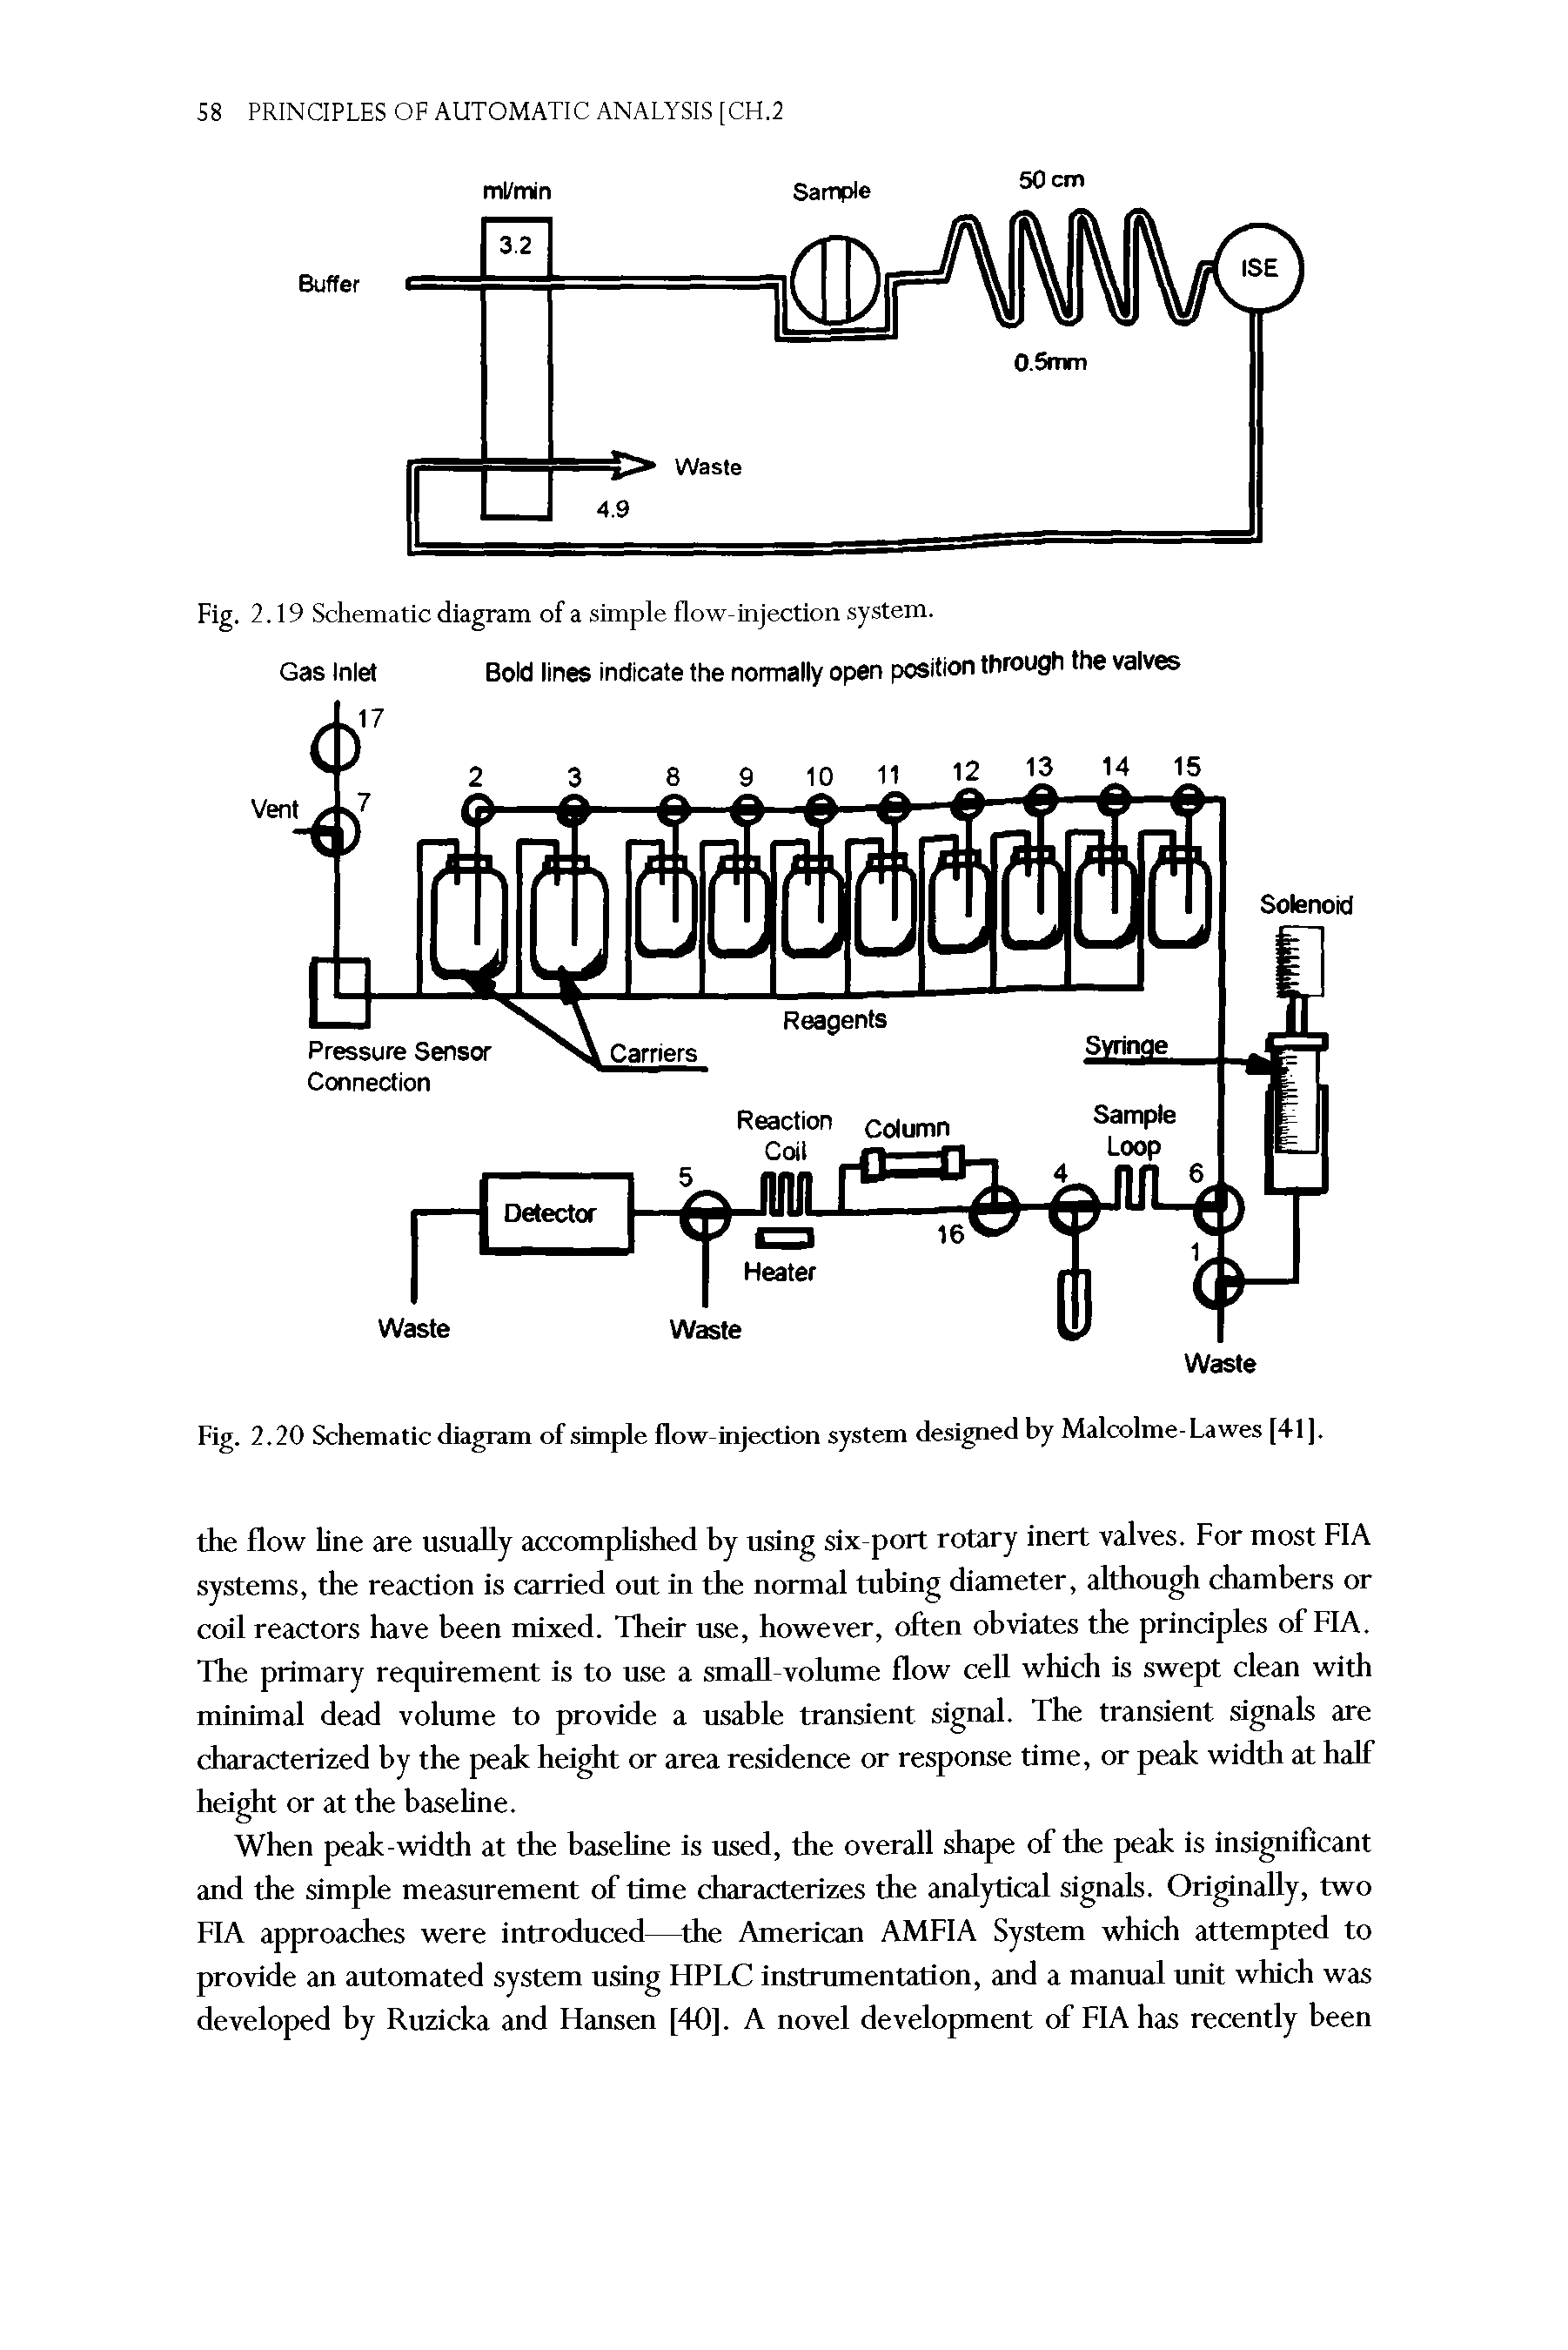 Fig. 2.19 Schematic diagram of a simple flow-injection system.